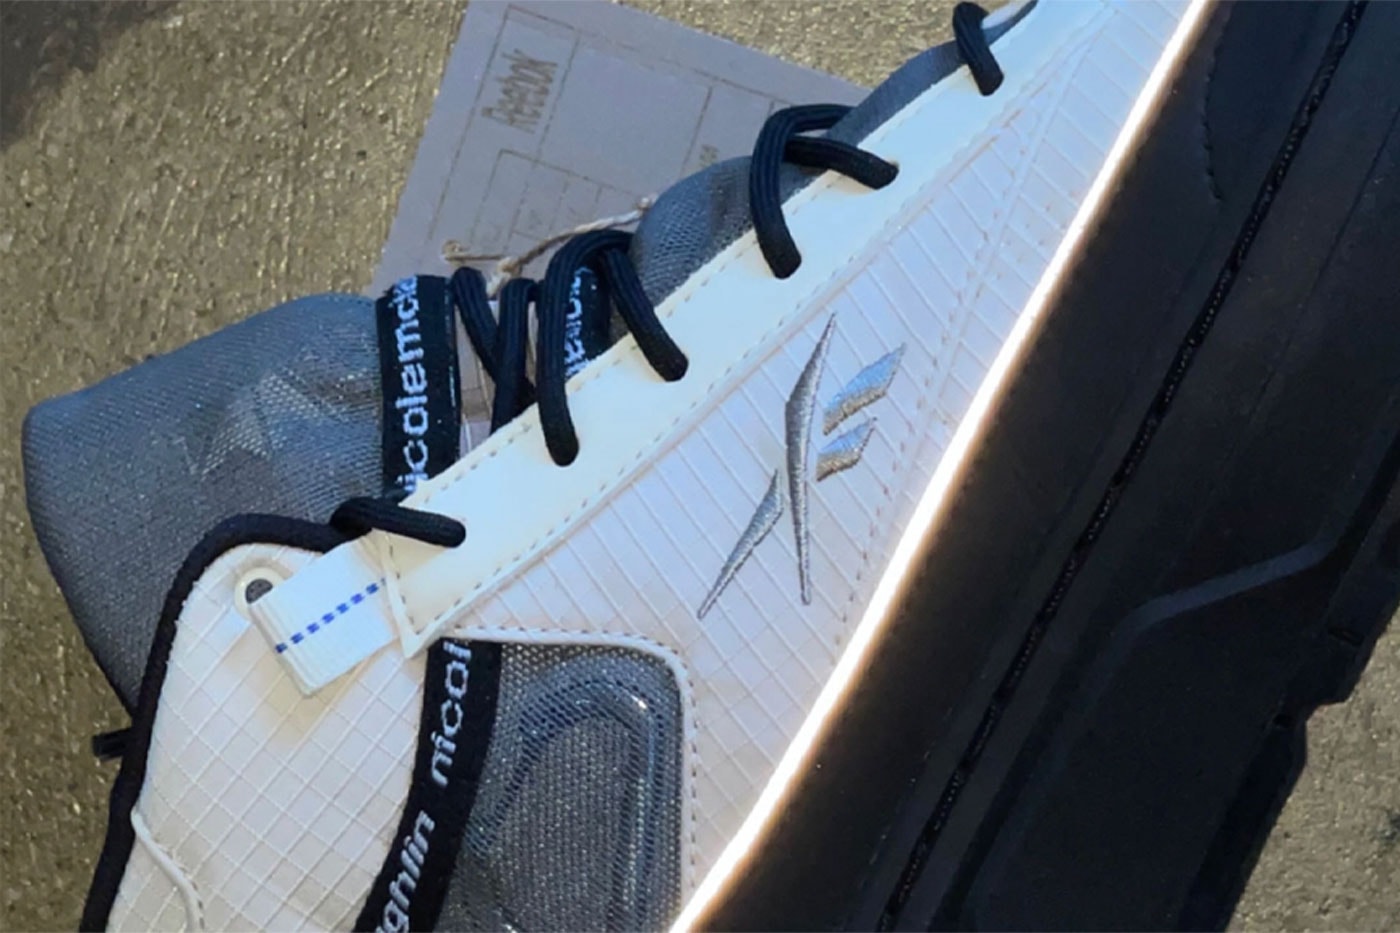 Nicole Mclaughlin Teases Reebok Sneaker Collaboration upcycle white grid nylon mesh caribiner arc teryx reflective piping stacked black sole unit release info